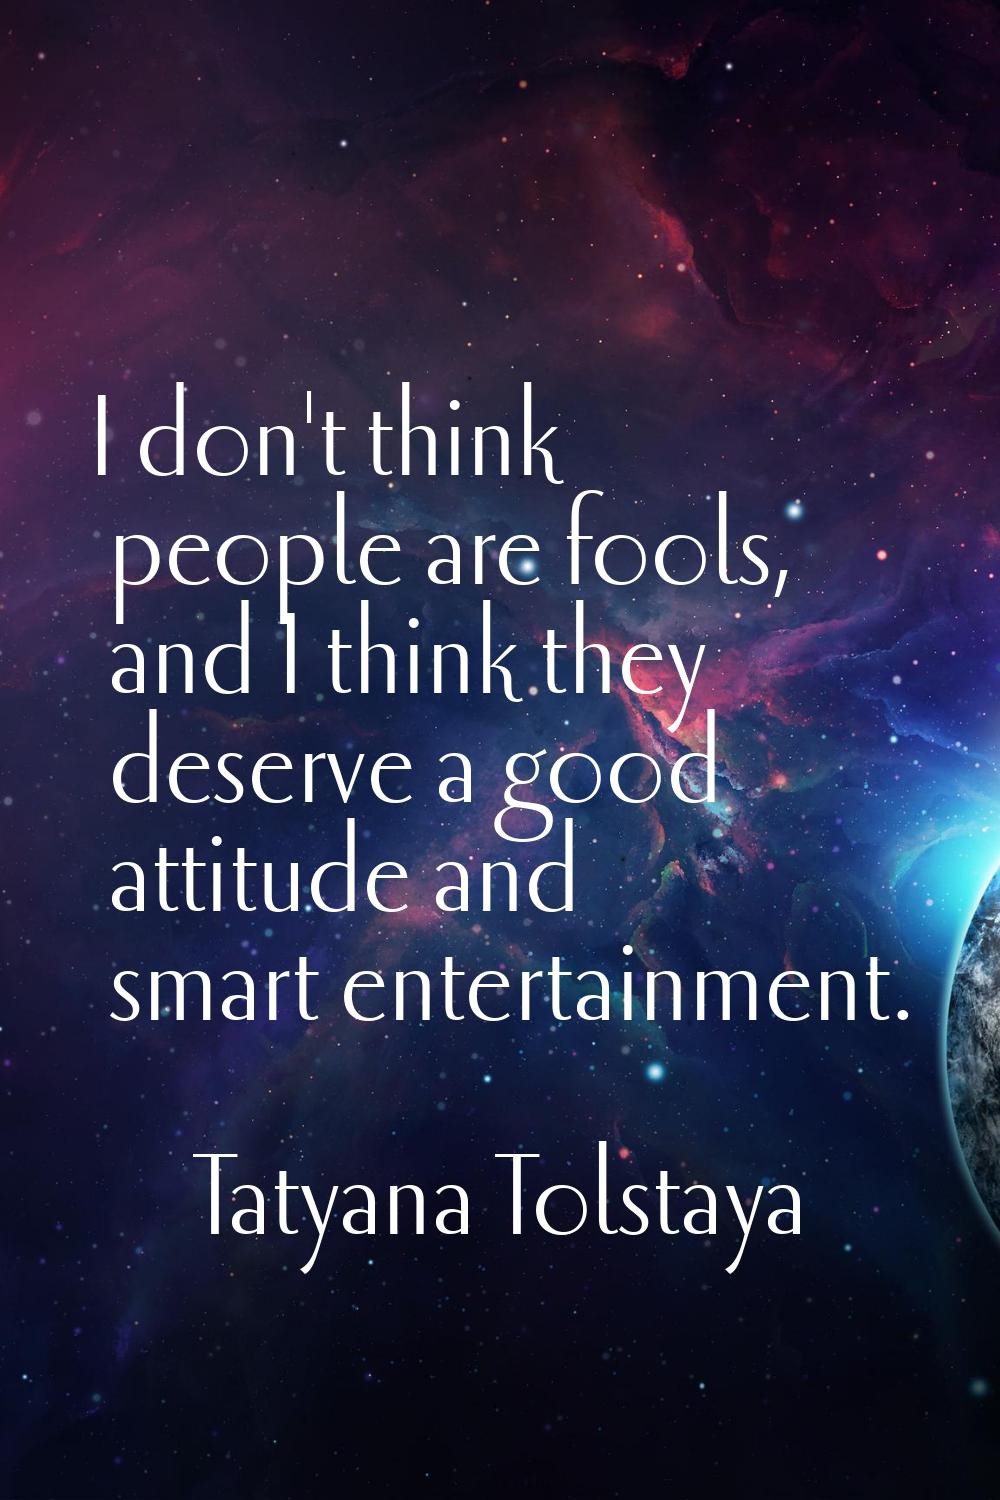 I don't think people are fools, and I think they deserve a good attitude and smart entertainment.